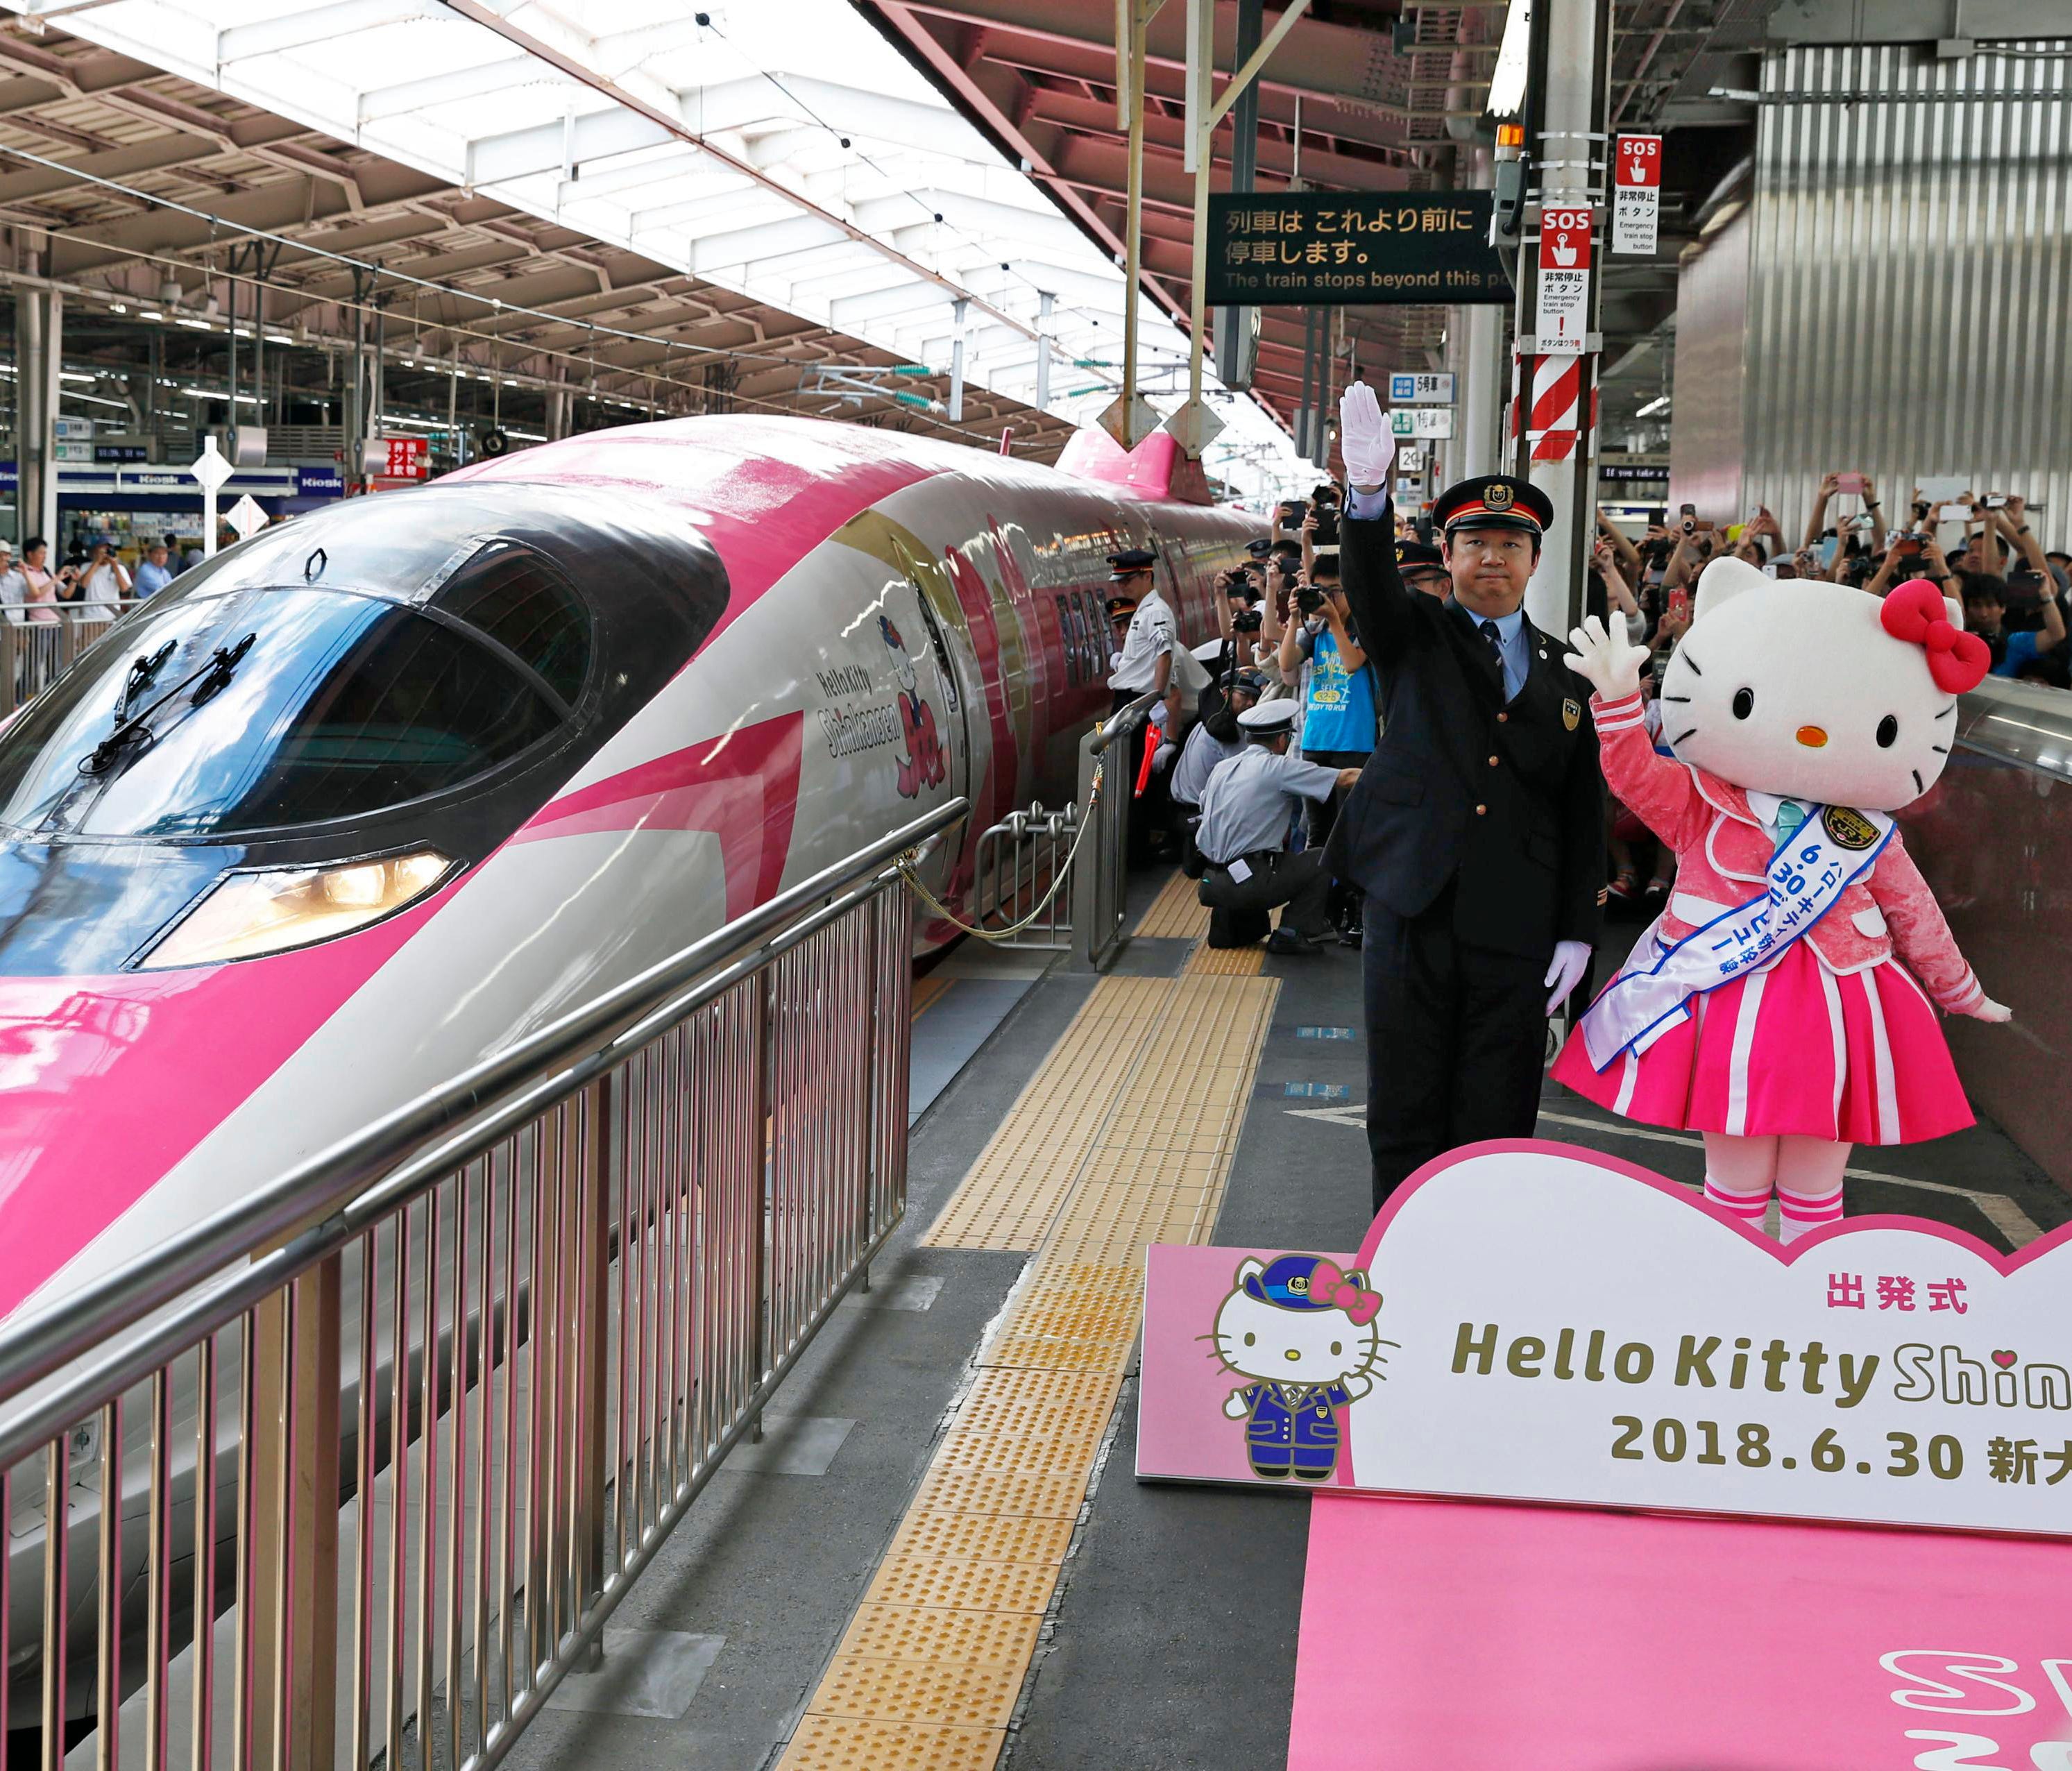 A Hello Kitty-themed bullet train is unveiled at JR Shin Osaka station, in Osaka Japan, June 30, 2018.  The special train had its inaugural round trip Saturday between Osaka and Fukuoka, connecting Japan's west and south until the end of September. T